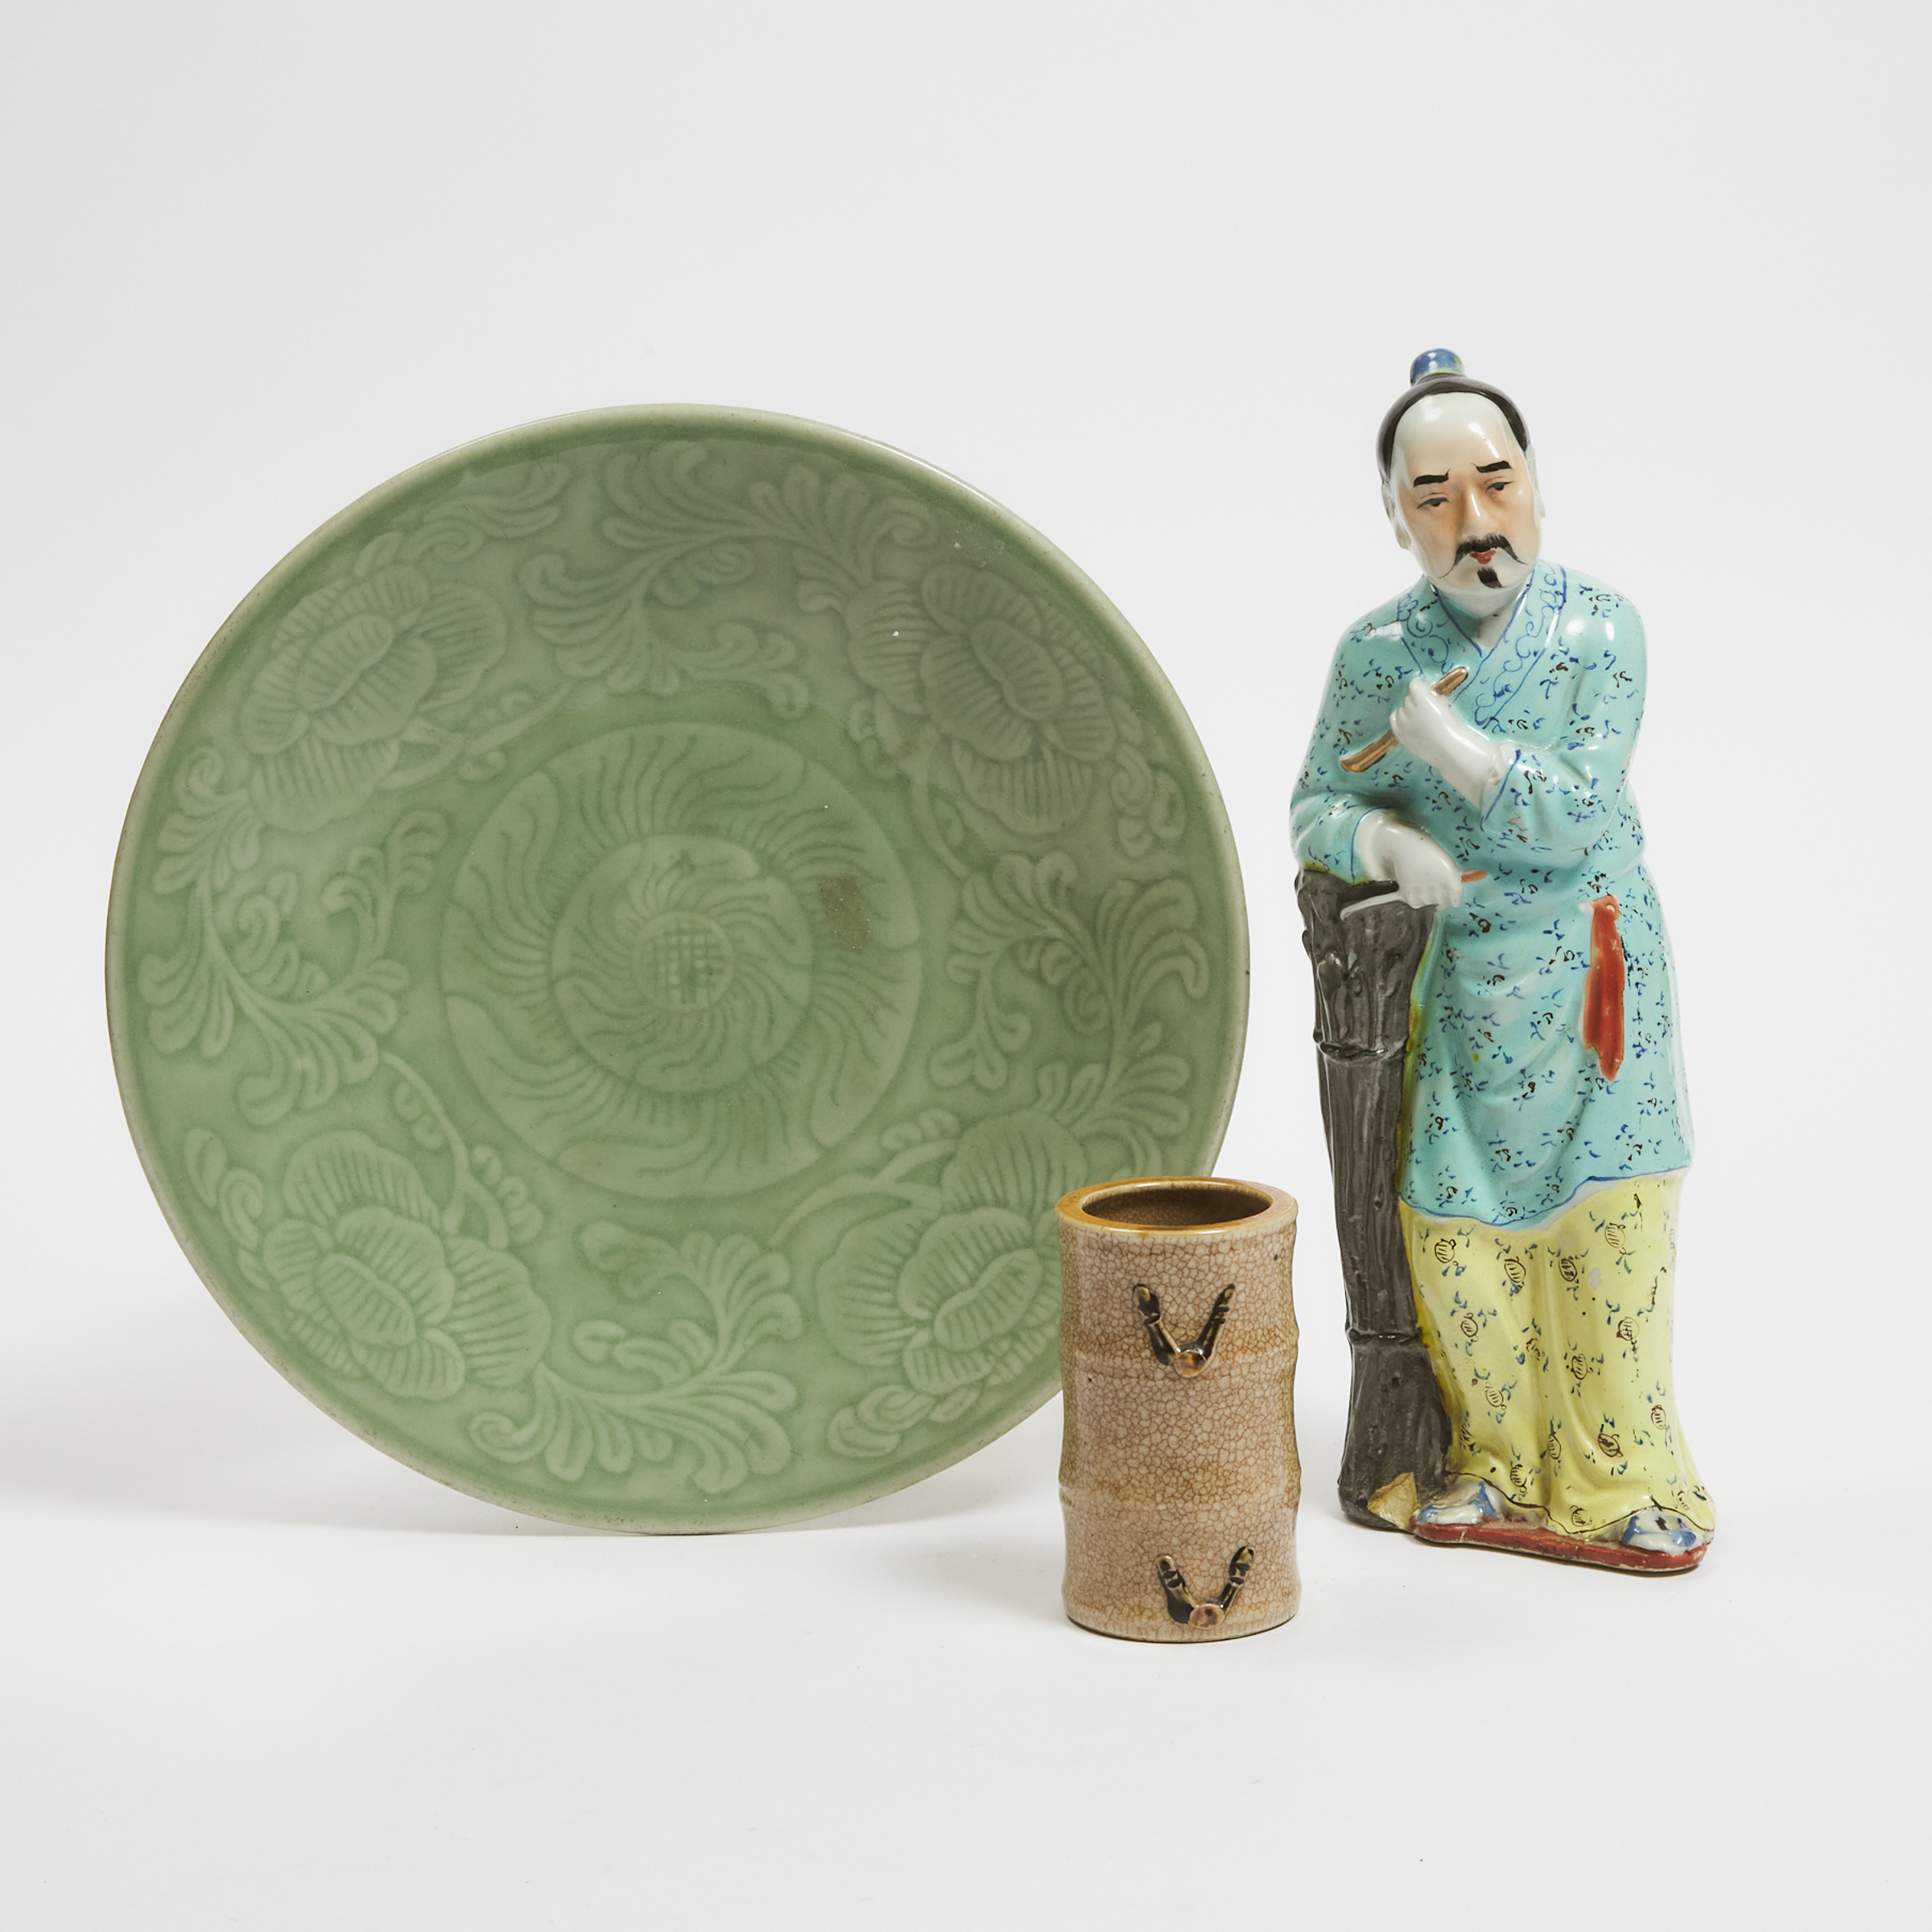 A Group of Three Porcelain Items, 19th/20th Century